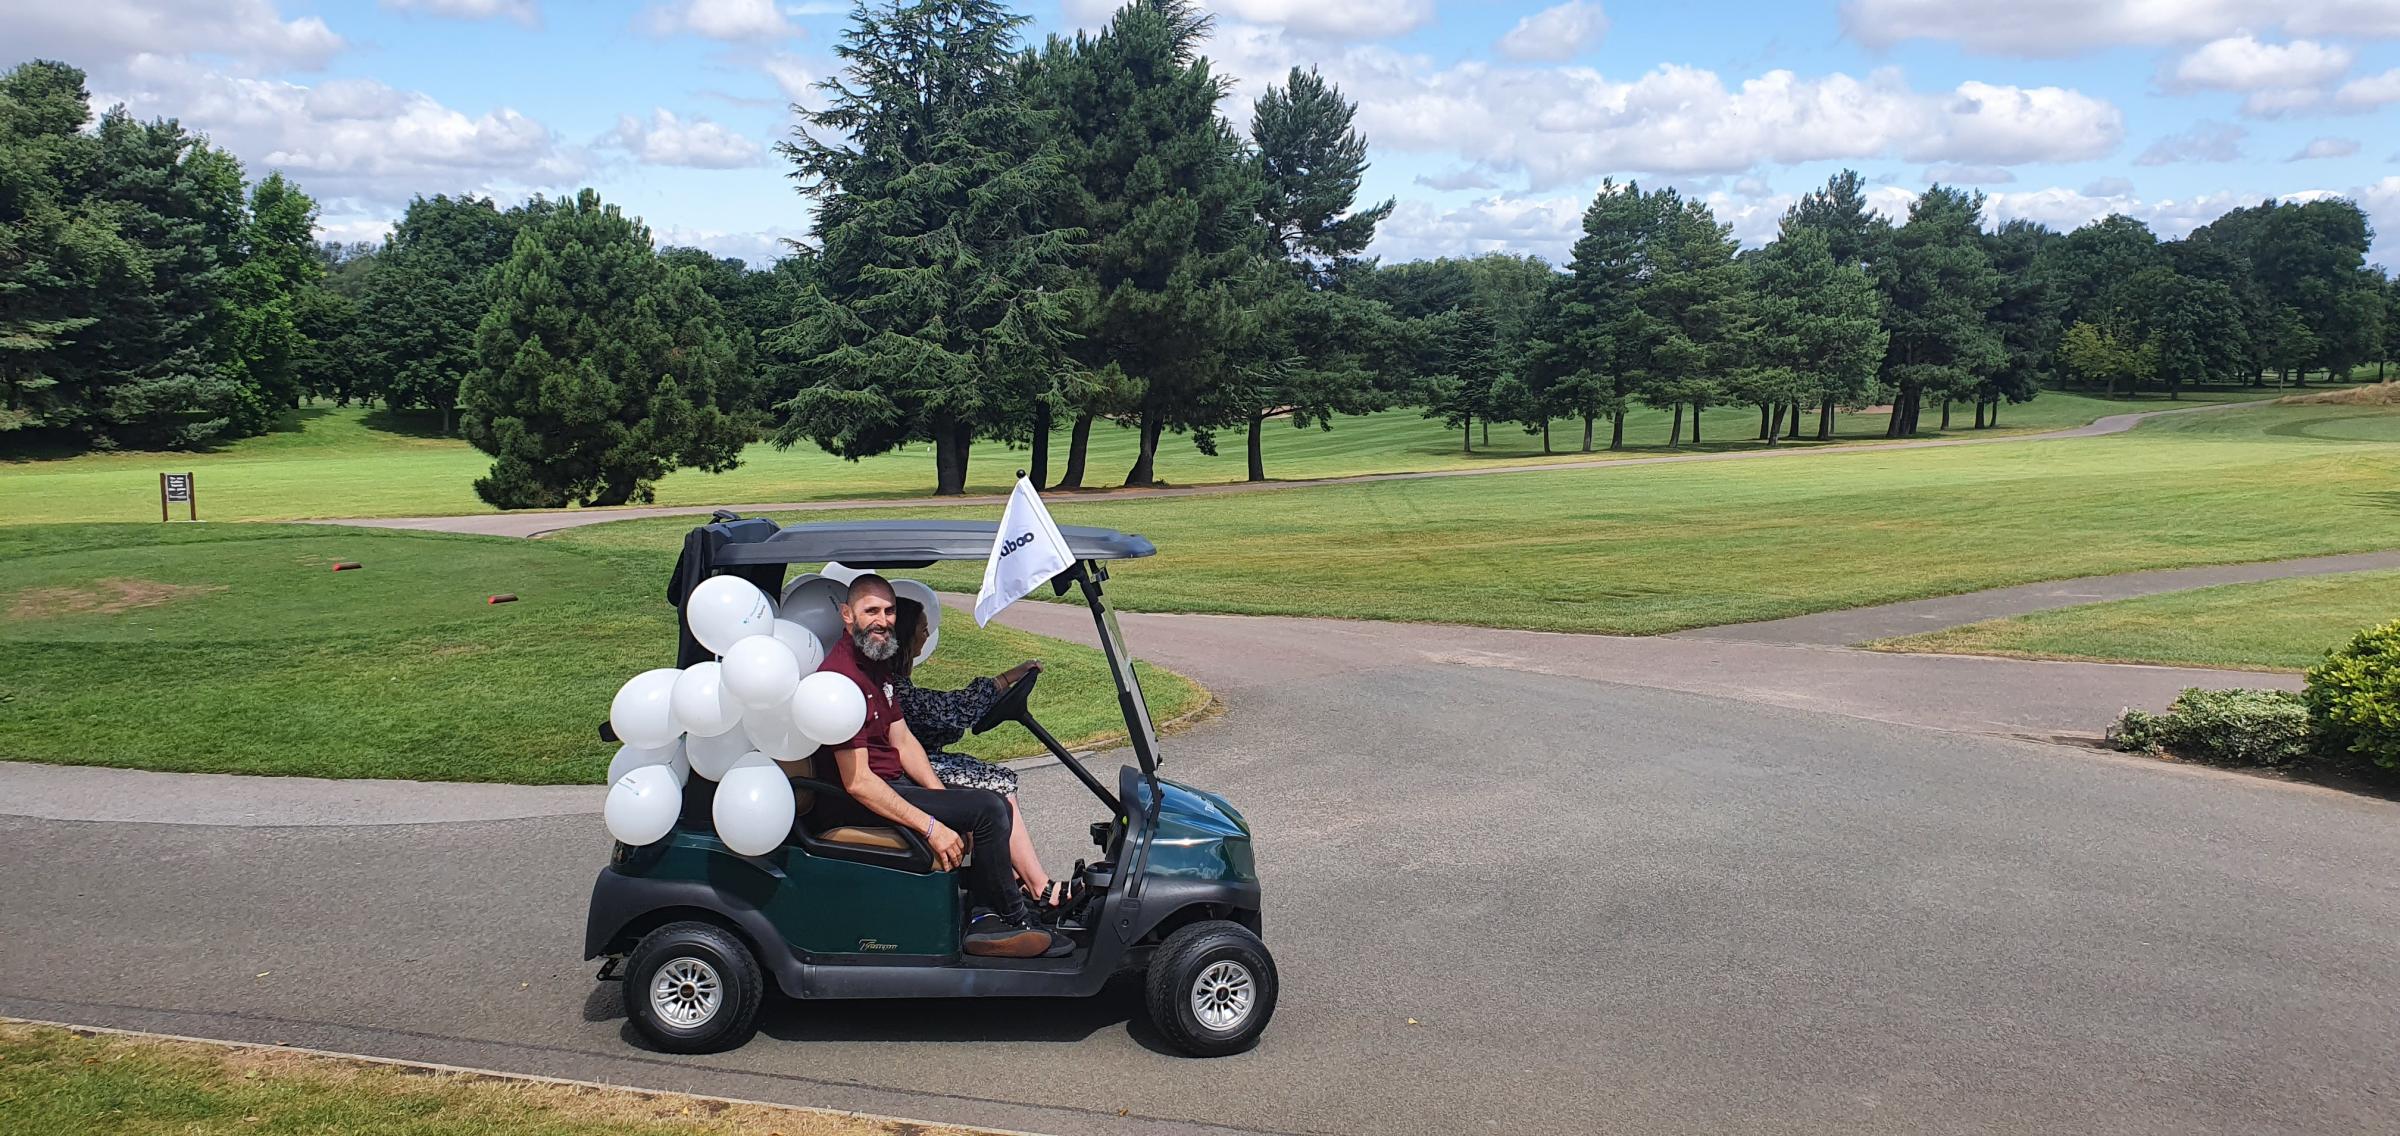 eCommerce specialist Visualsoft held one of the companies most successful charity golf days, raising over £8,000 for the Solan Connor Fawcett Family Cancer Trust.